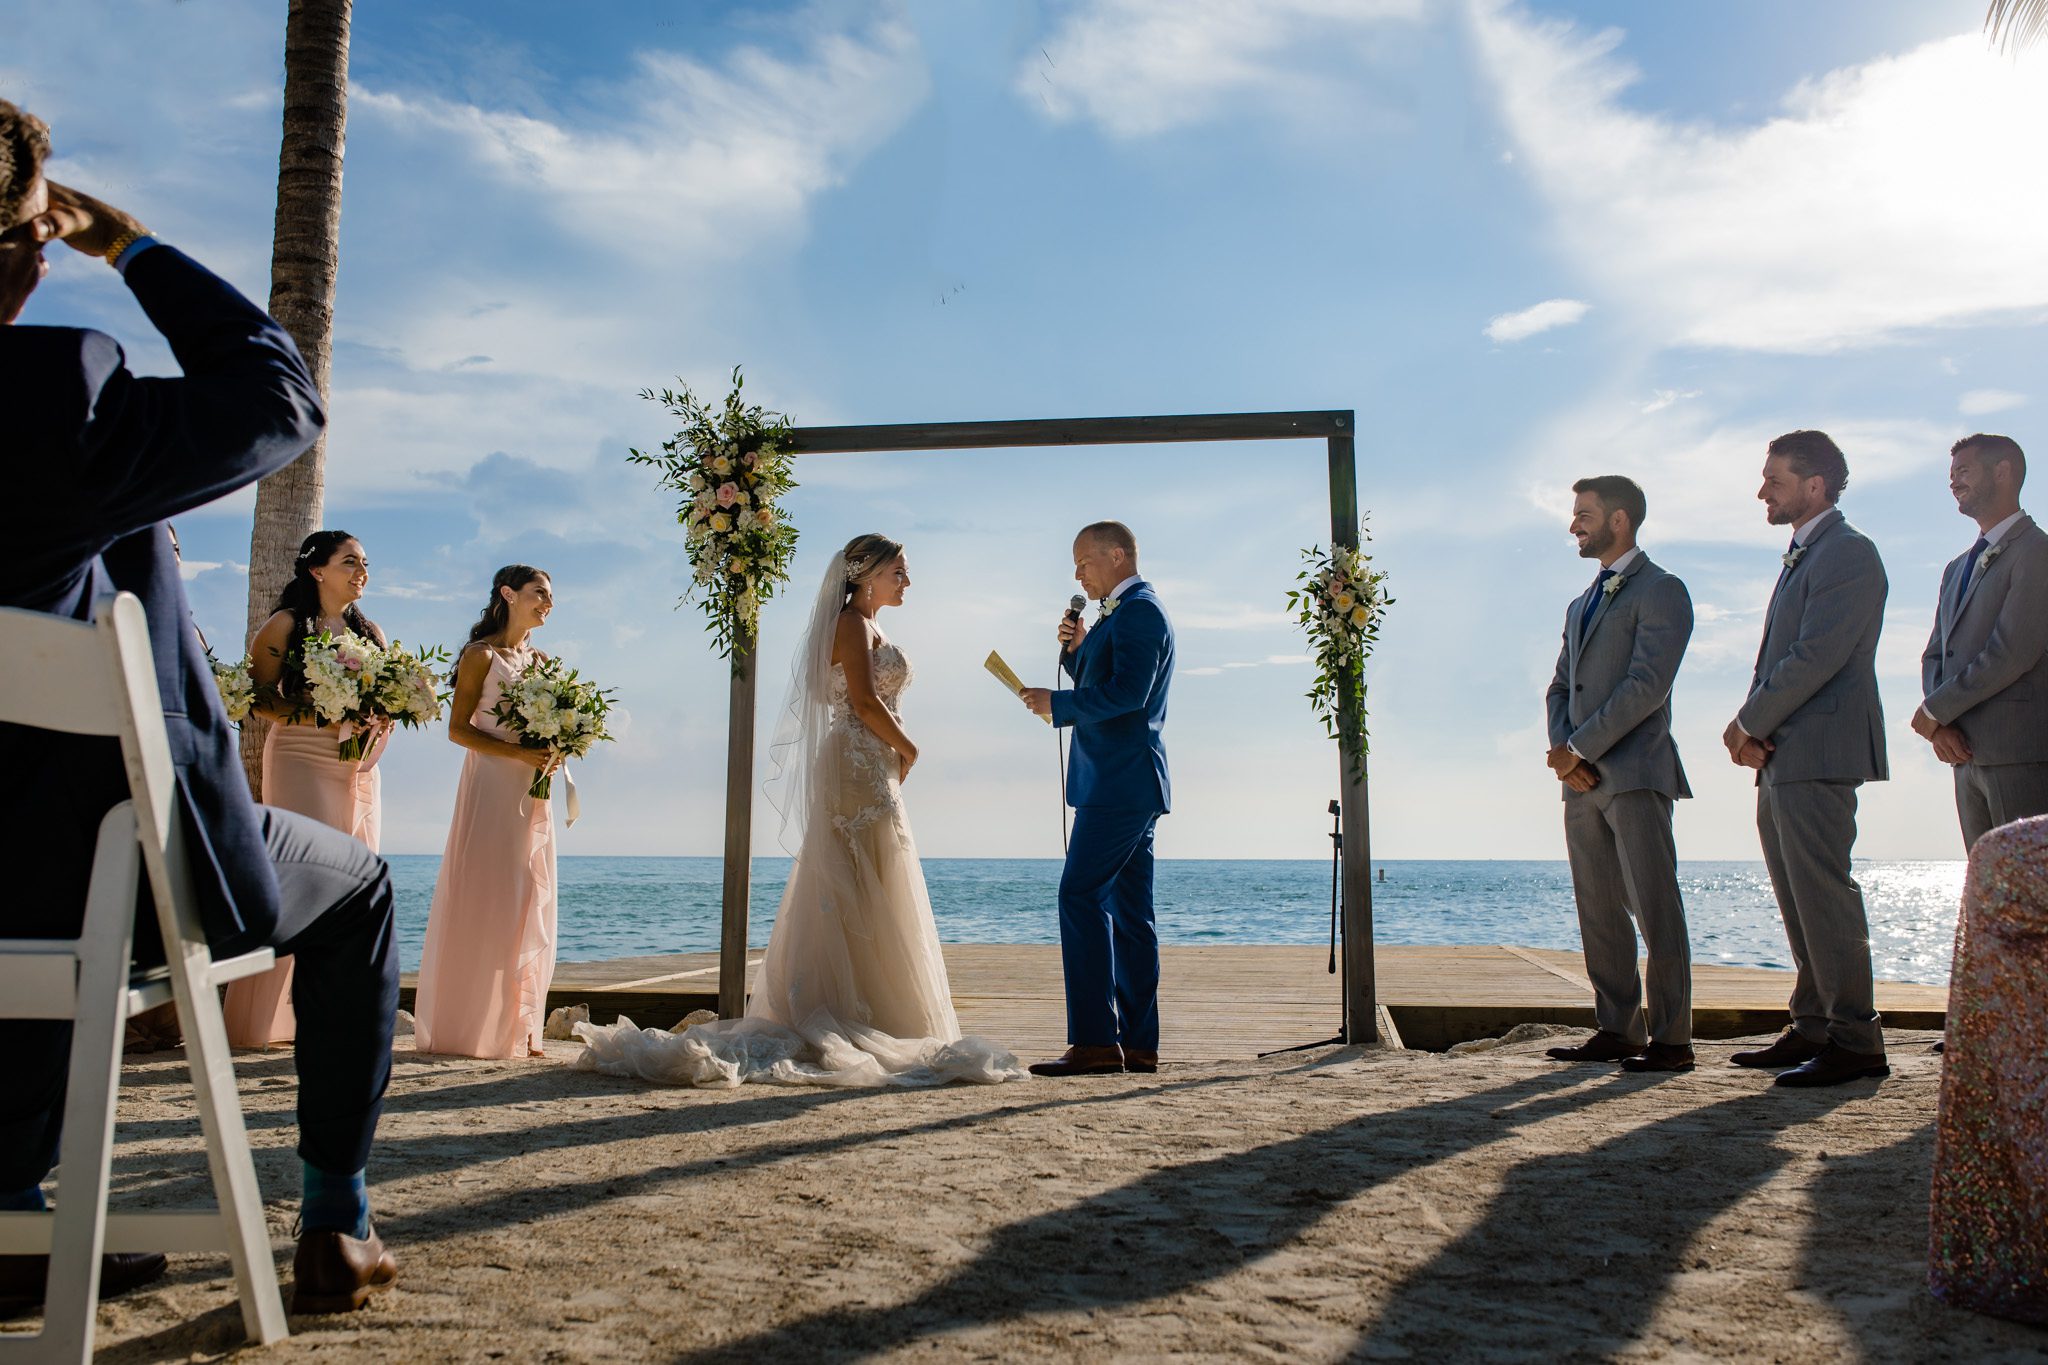 A wedding ceremony on the beach with a bride and groom.